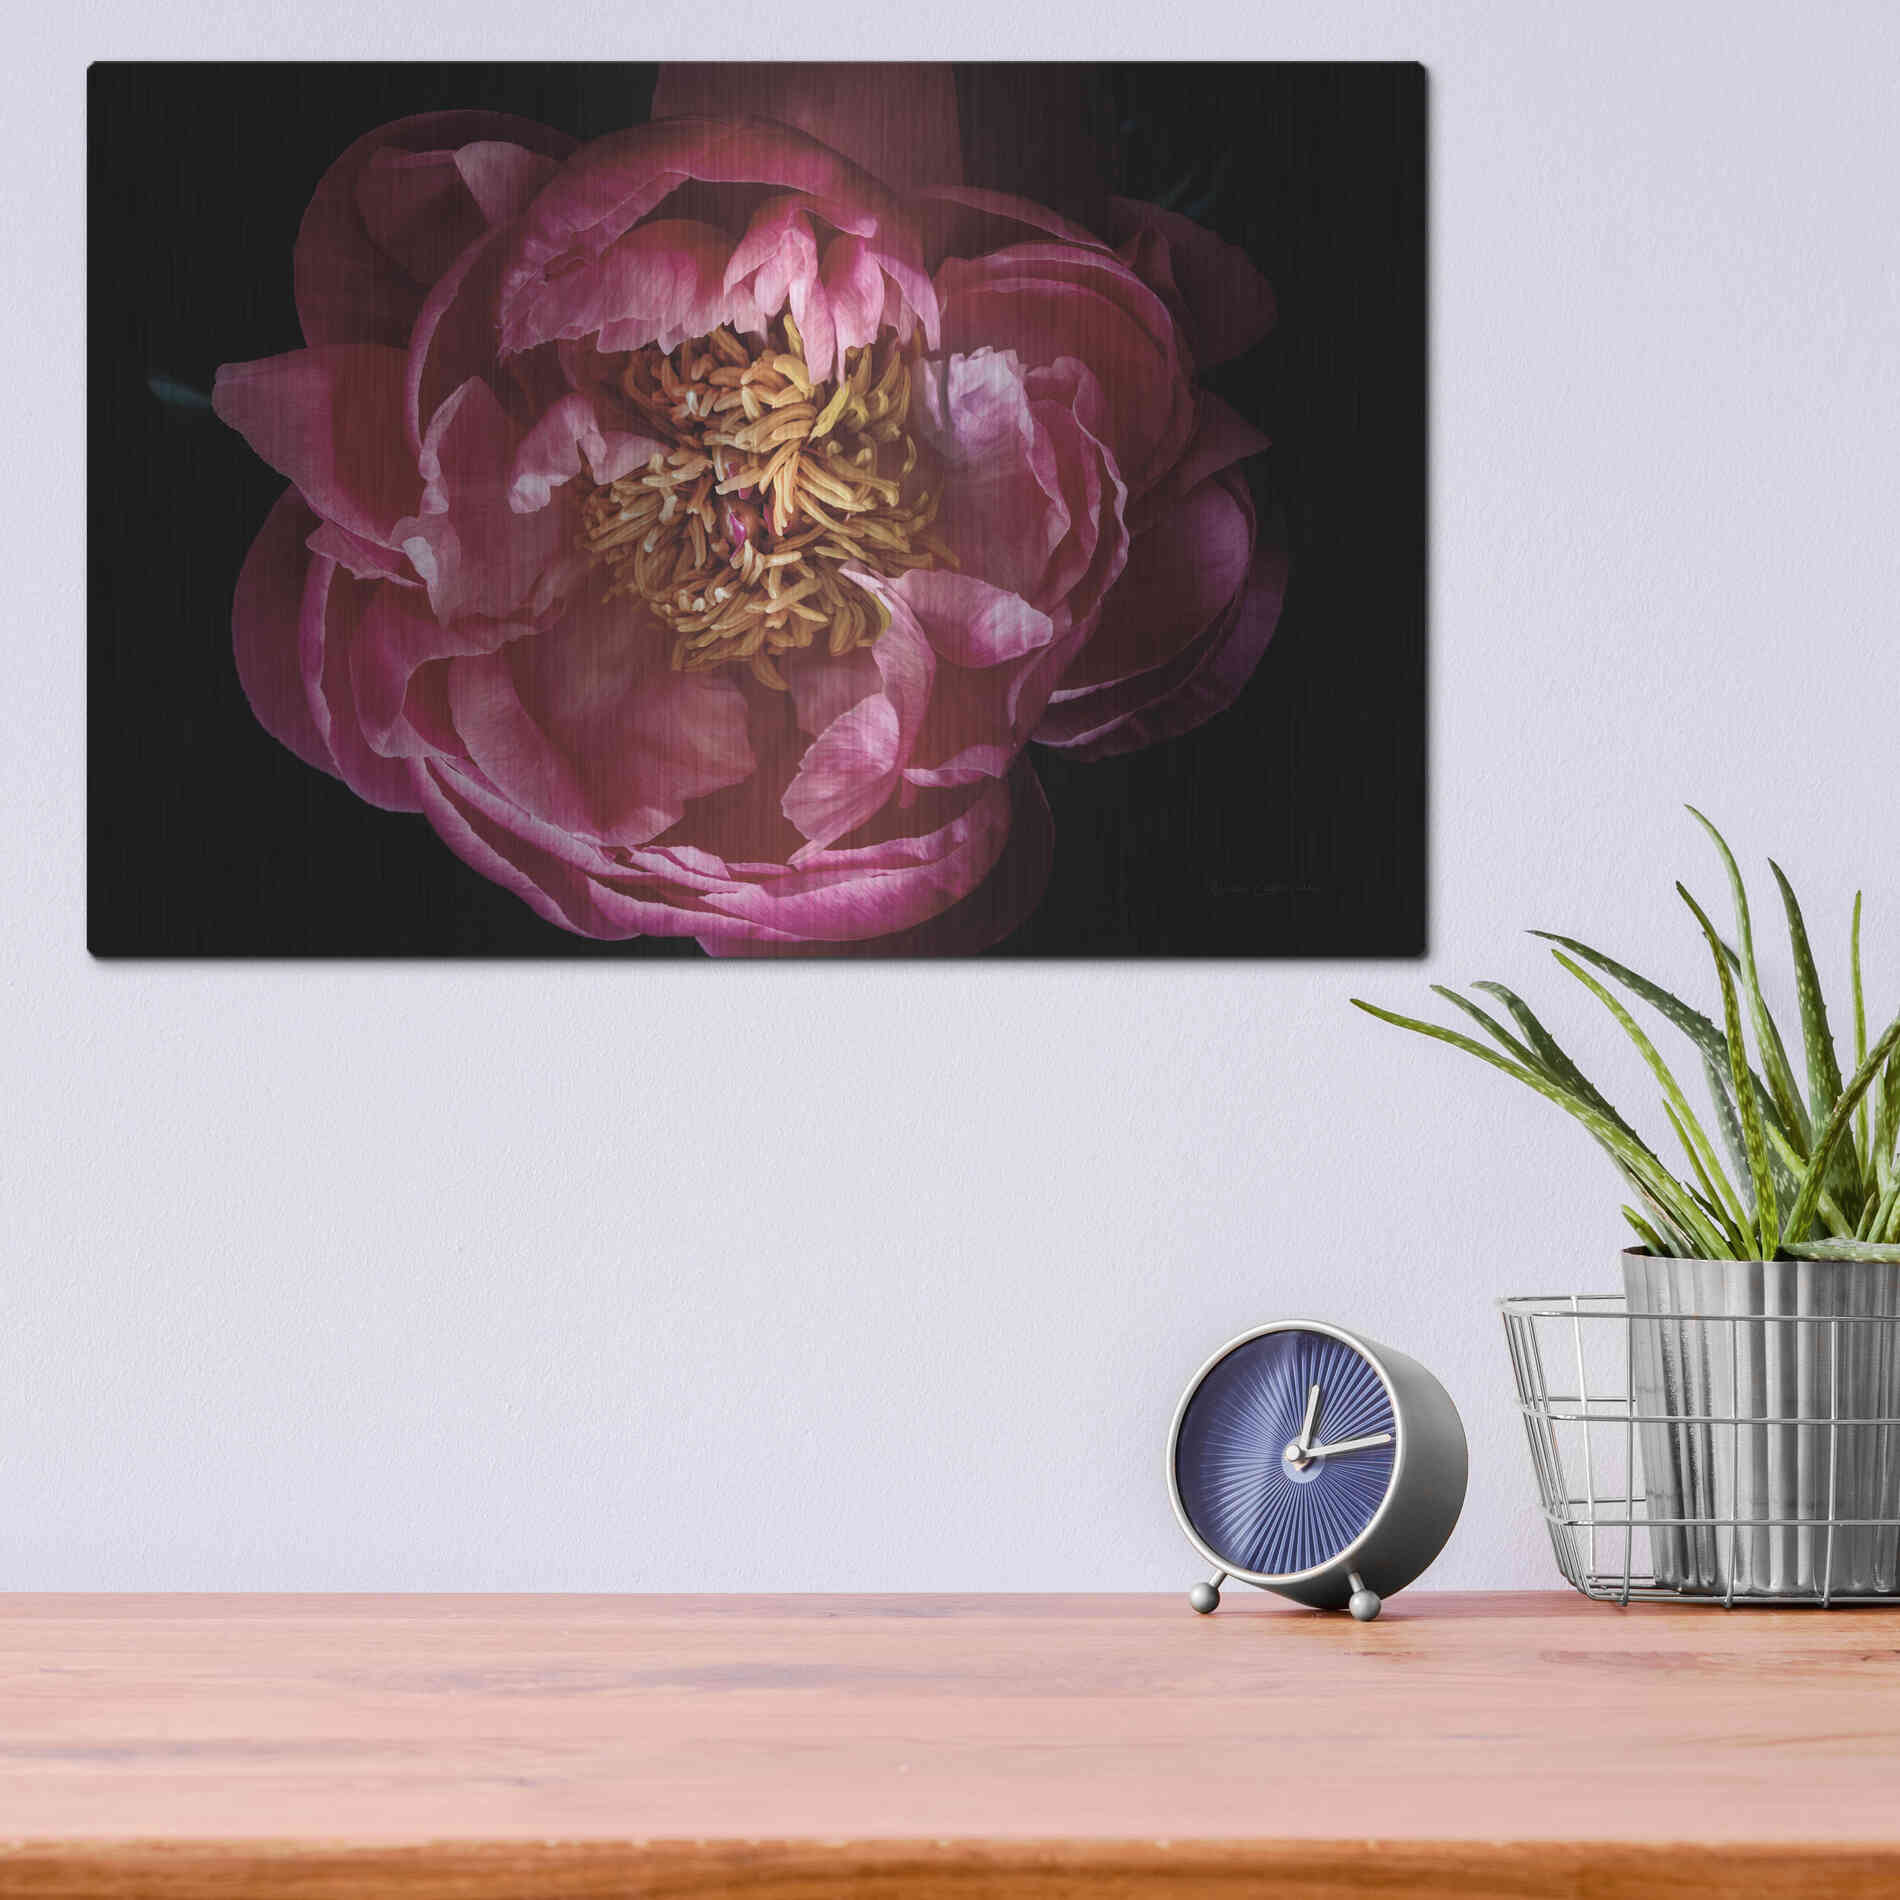 Luxe Metal Art 'Coral Peony' by Elise Catterall, Metal Wall Art,16x12